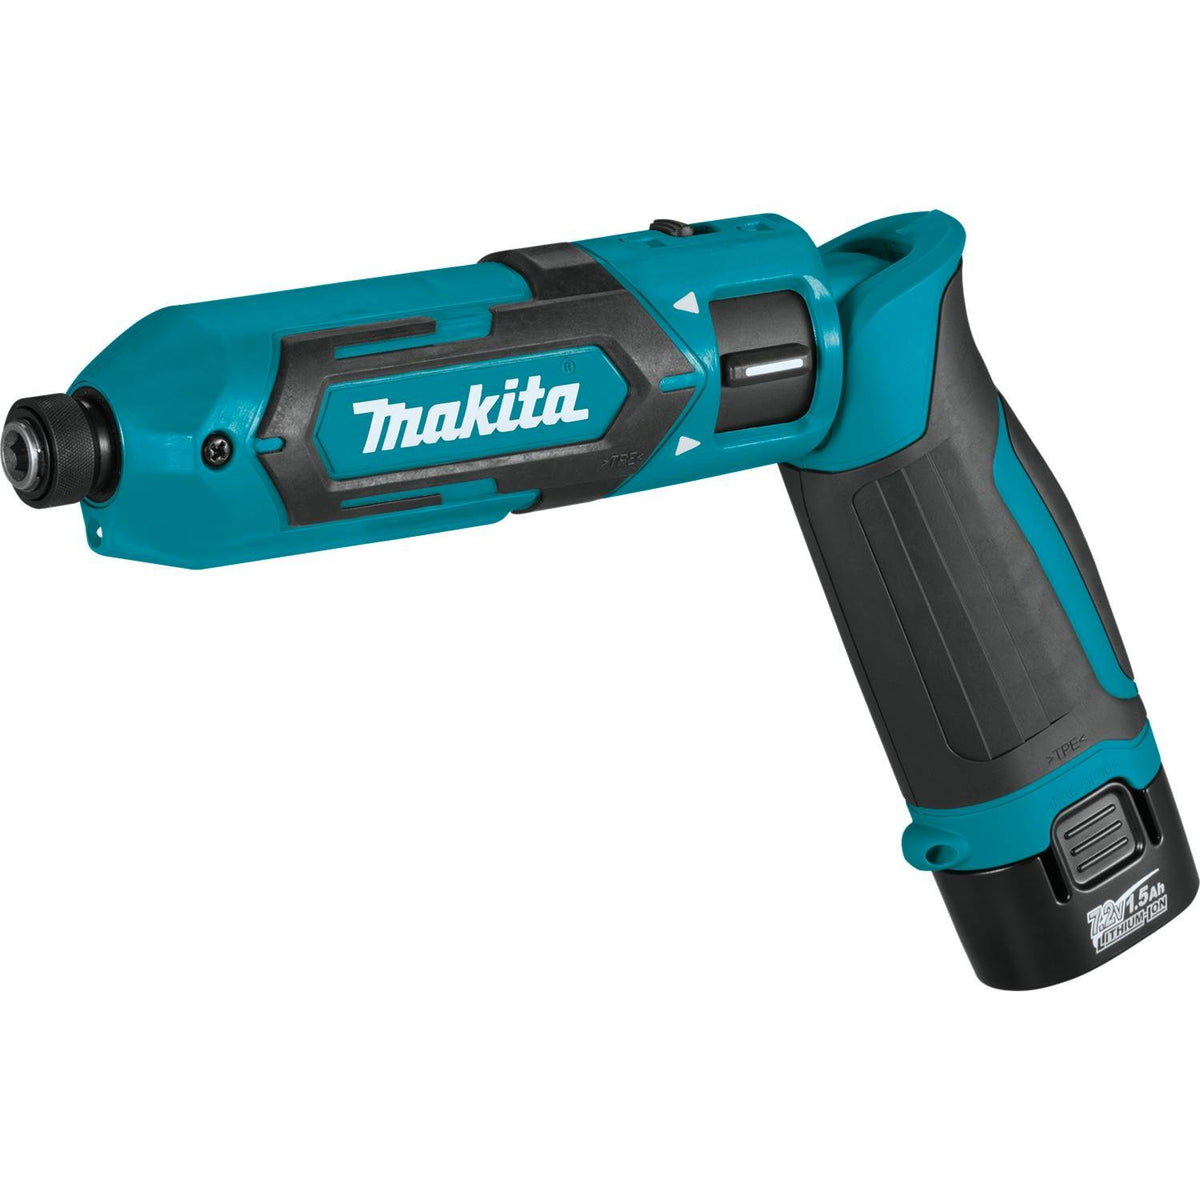 Makita TD022DSE 7.2V Lithium-Ion Cordless Impact Driver Kit, var. sp —  Contractor Tool Supply